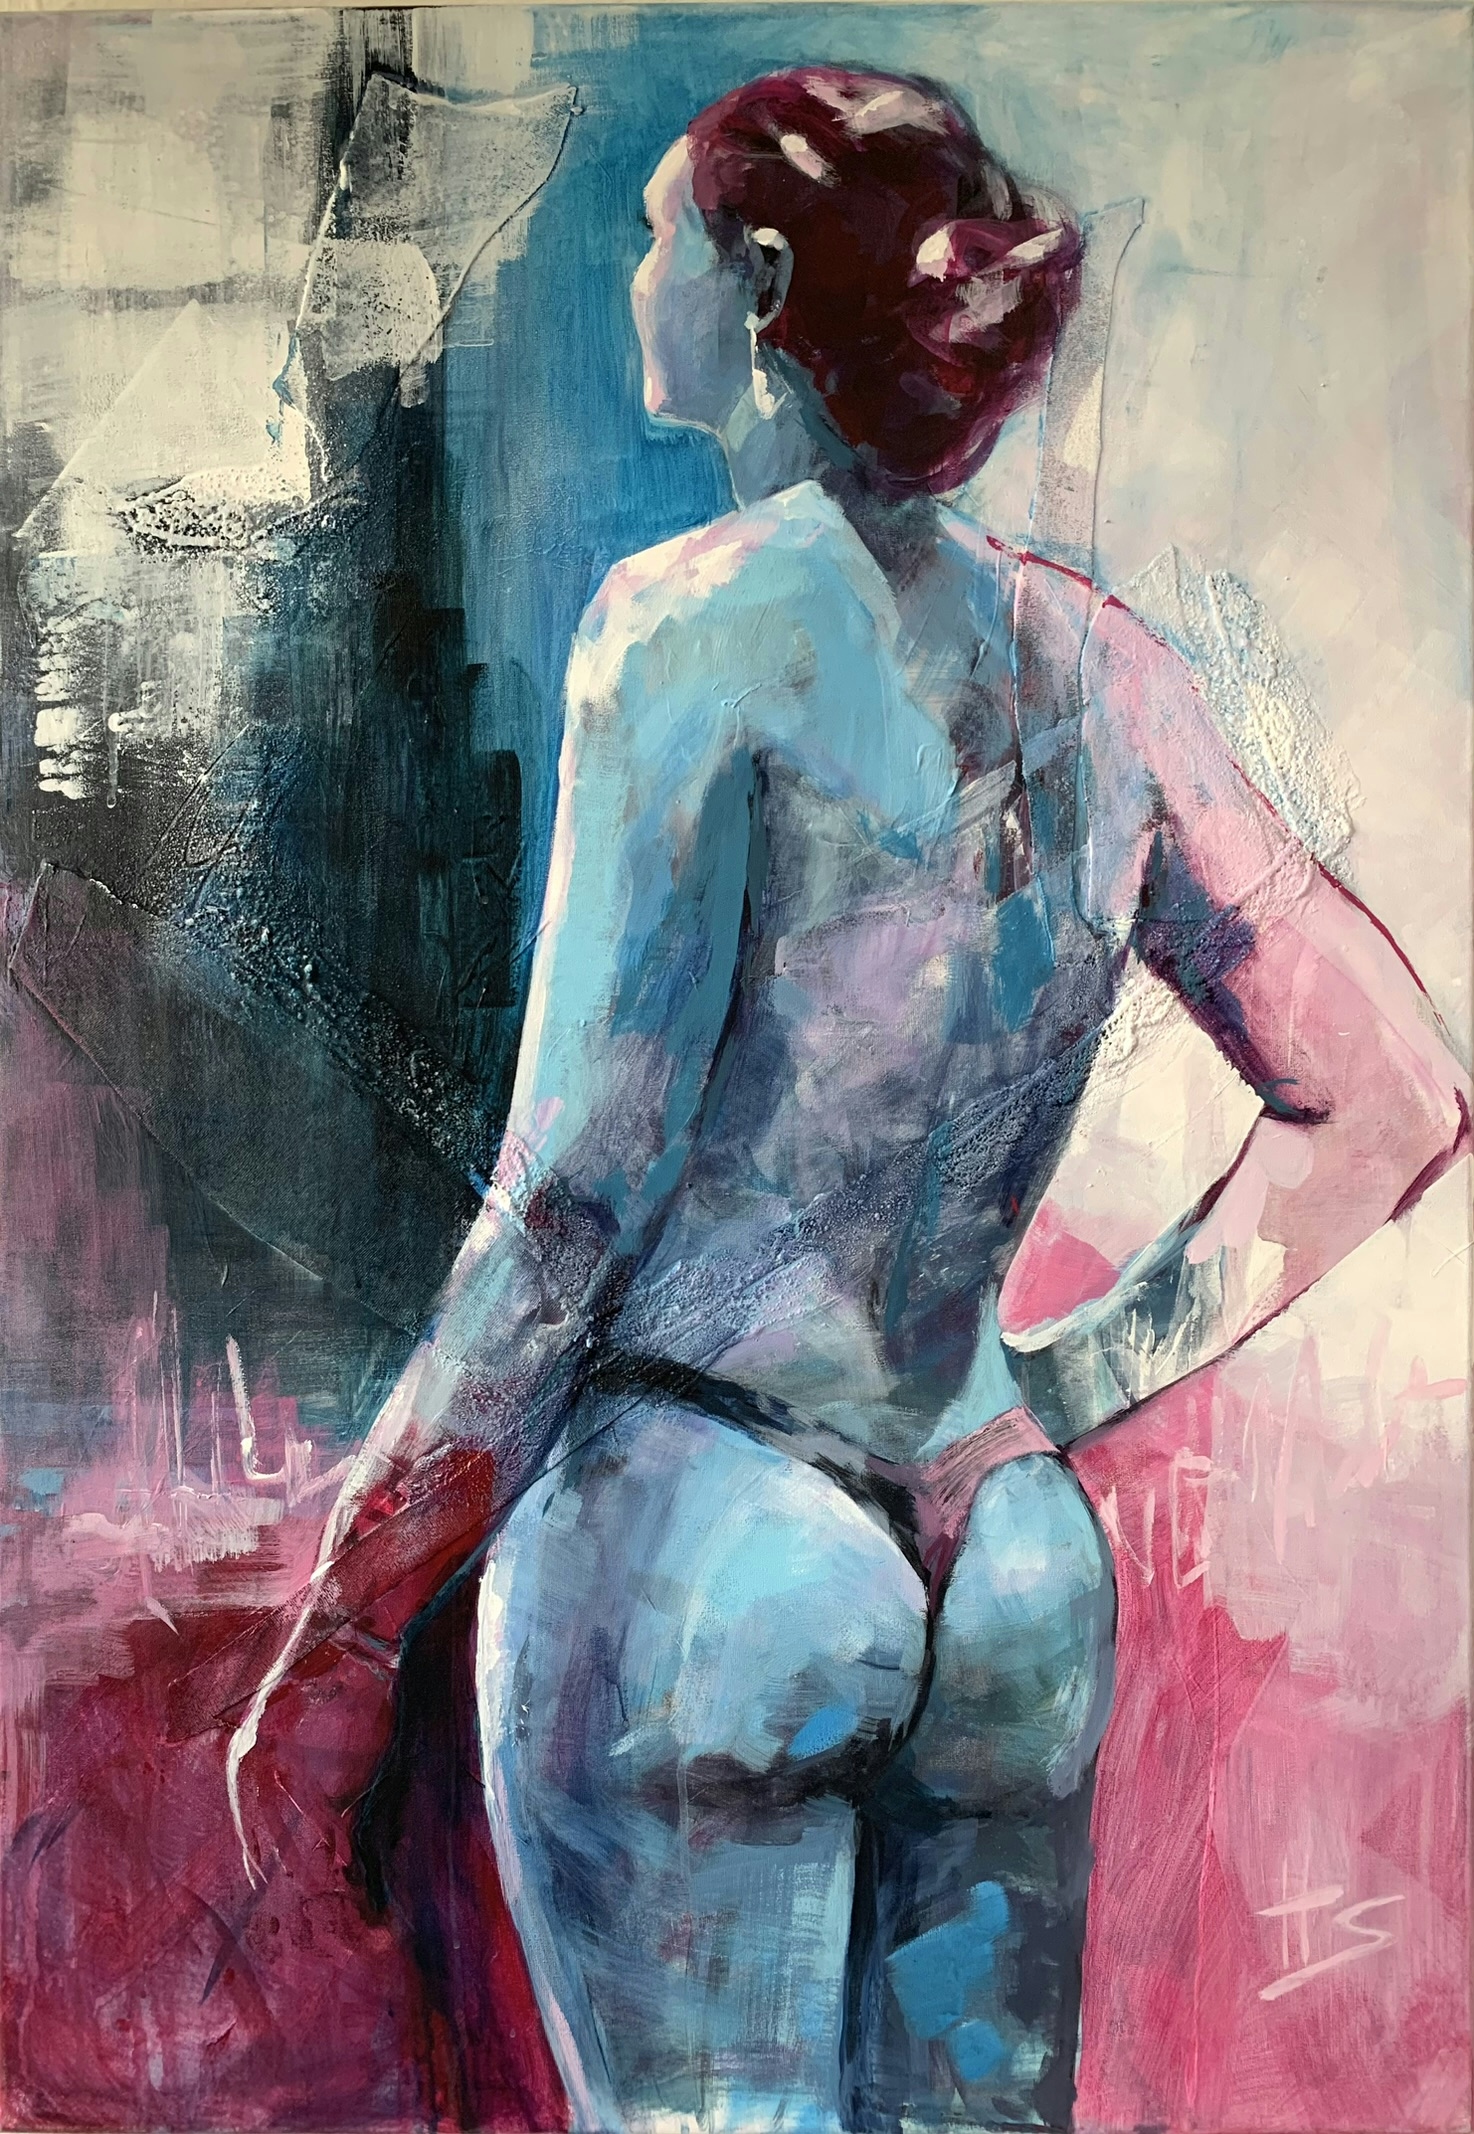 Nude artwork by Heike Schümann depicts a standing woman from behind